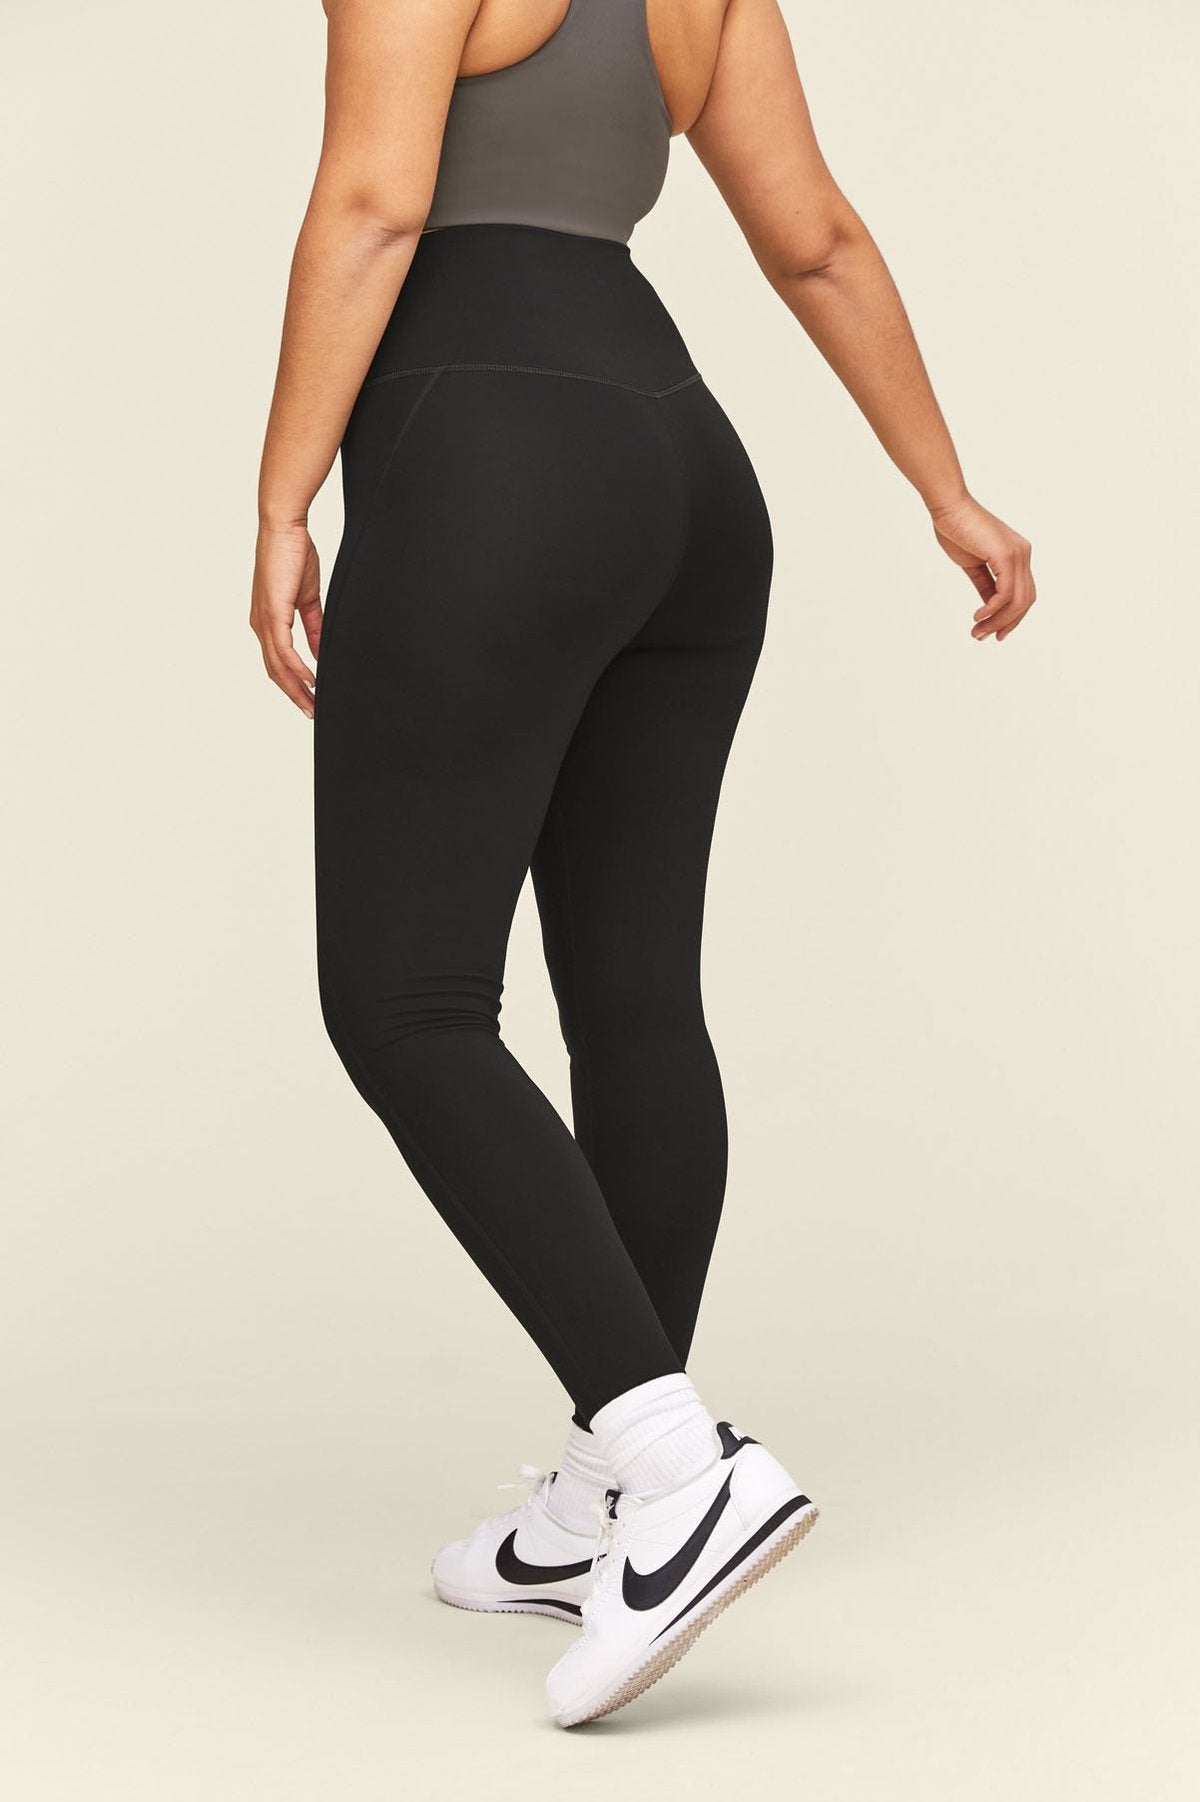 Girlfriend Collective Full Length High Rise Compressive Legging